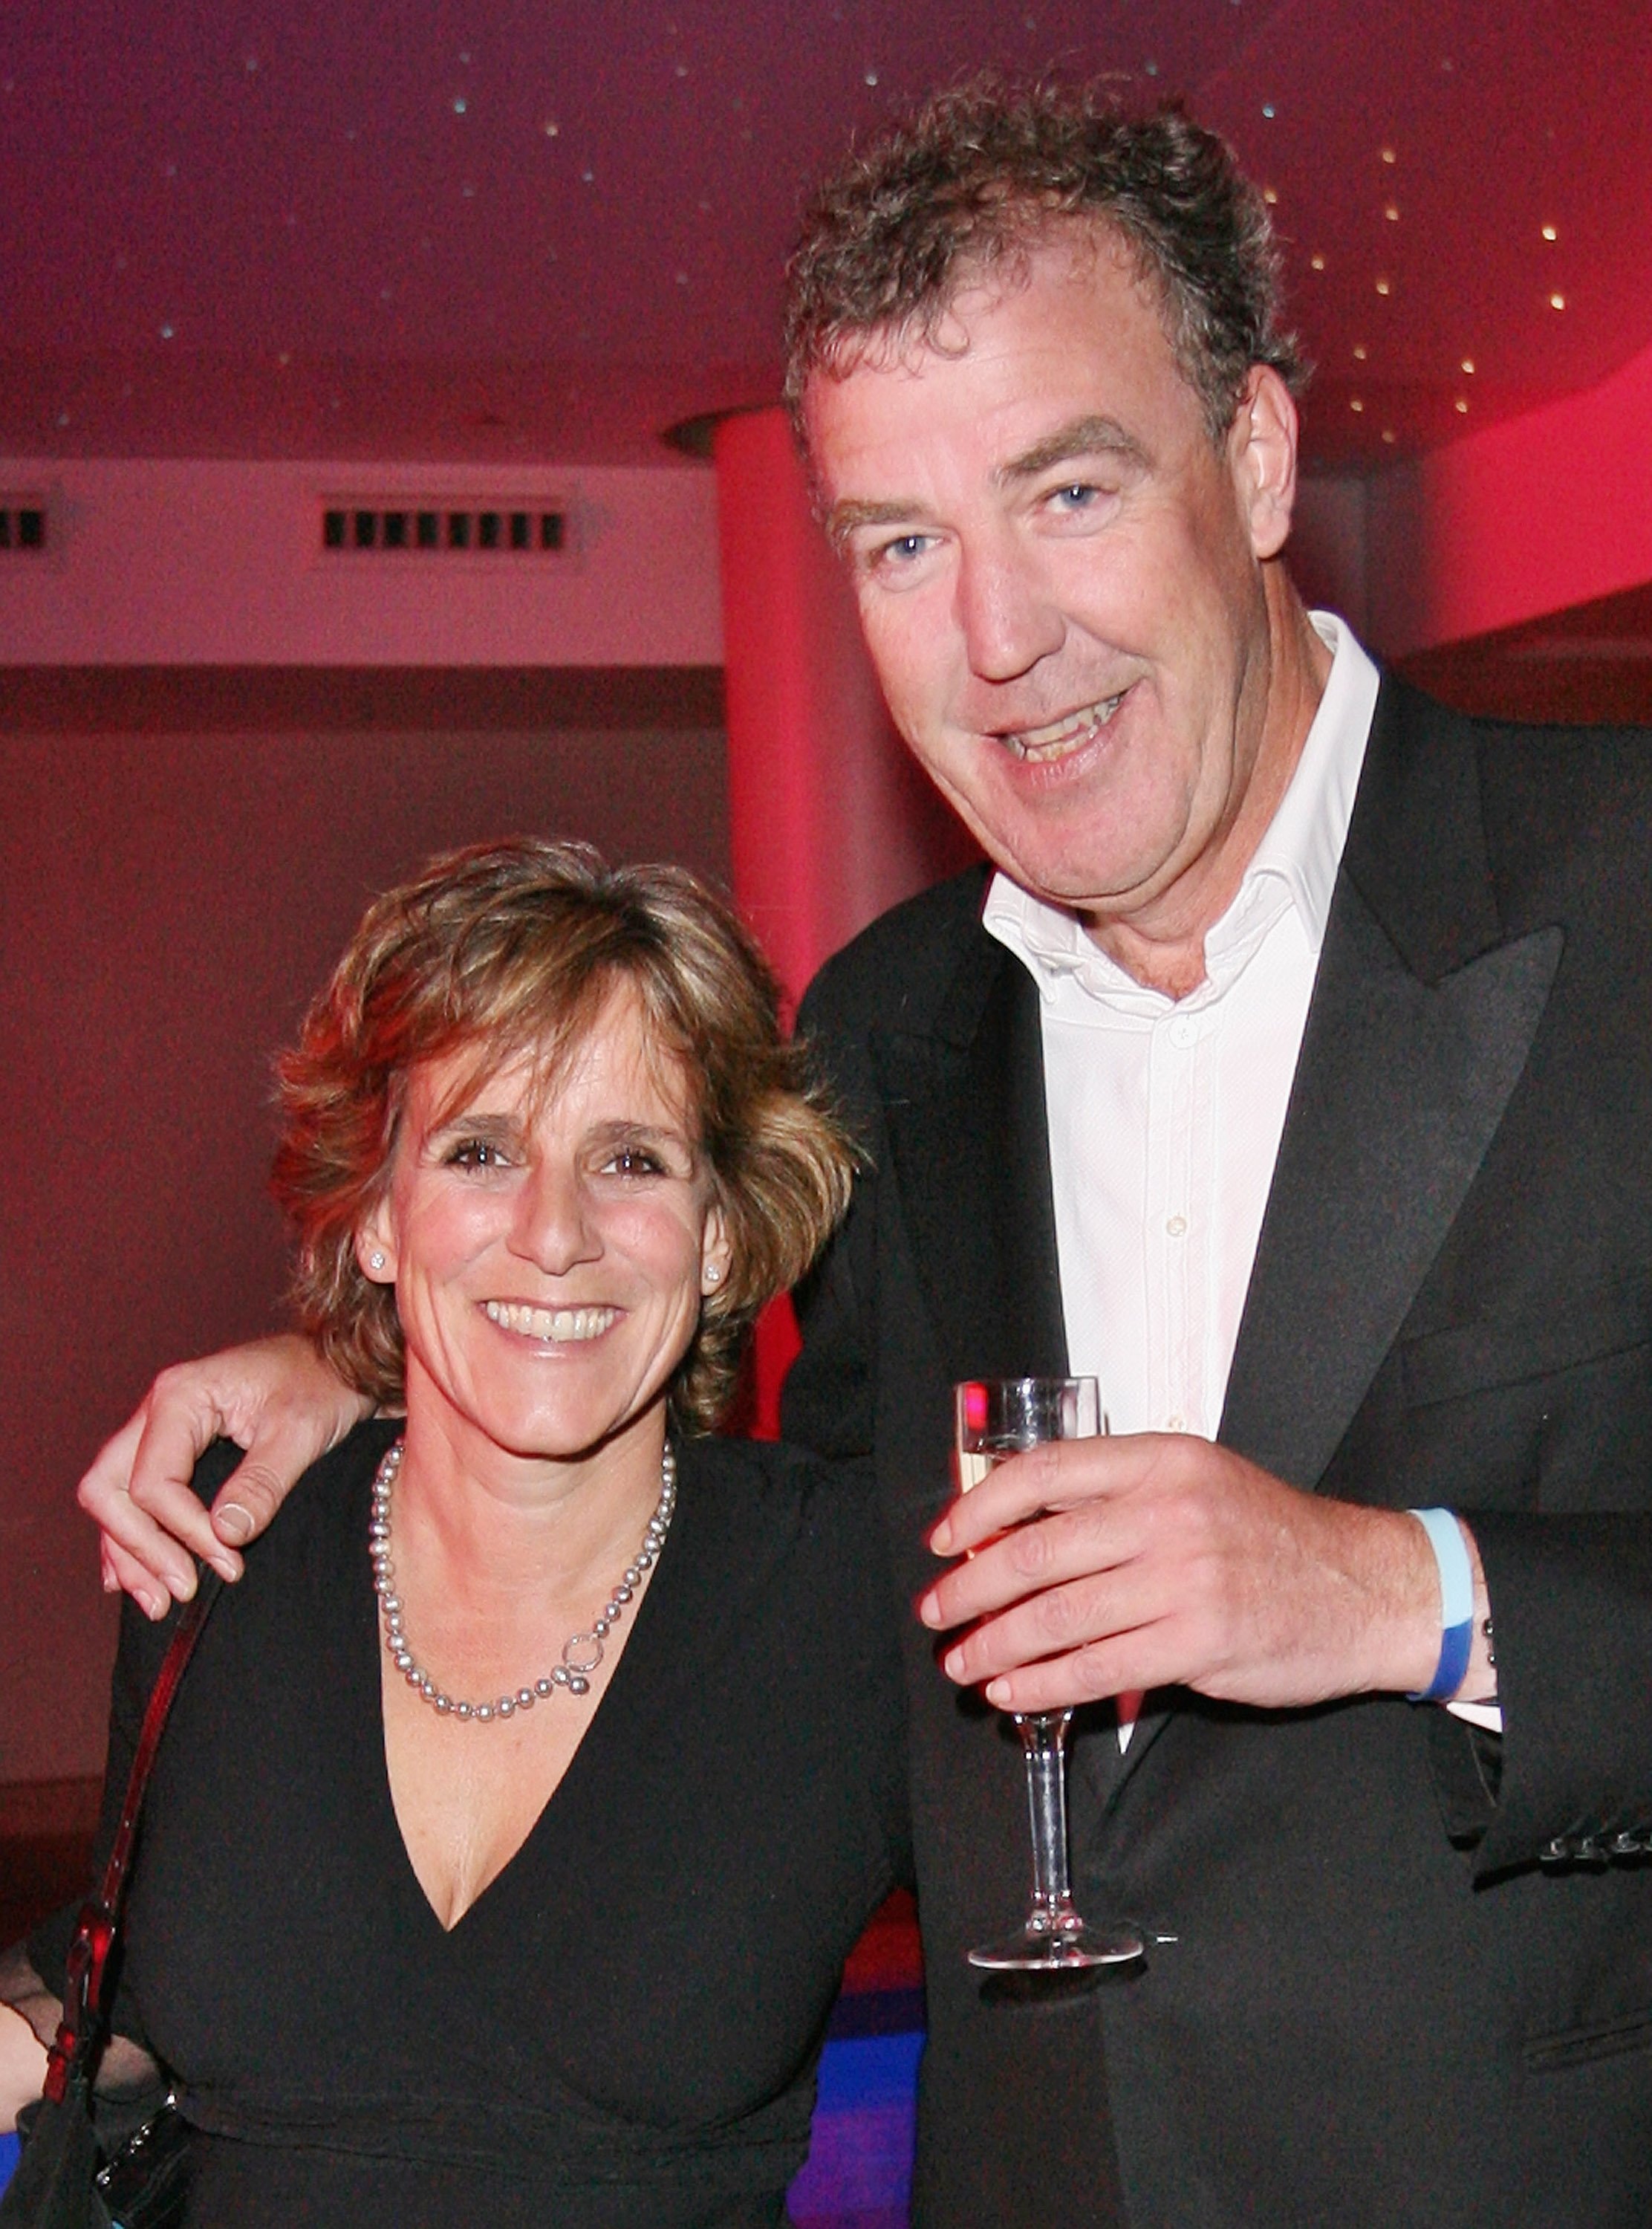 Jeremy Clarkson and Frances Catherine Cain pose at a 'Help For Heroes' fundraising evening held at the Haymarket Hotel on April 24, 2008, in London, England | Source: Getty Images